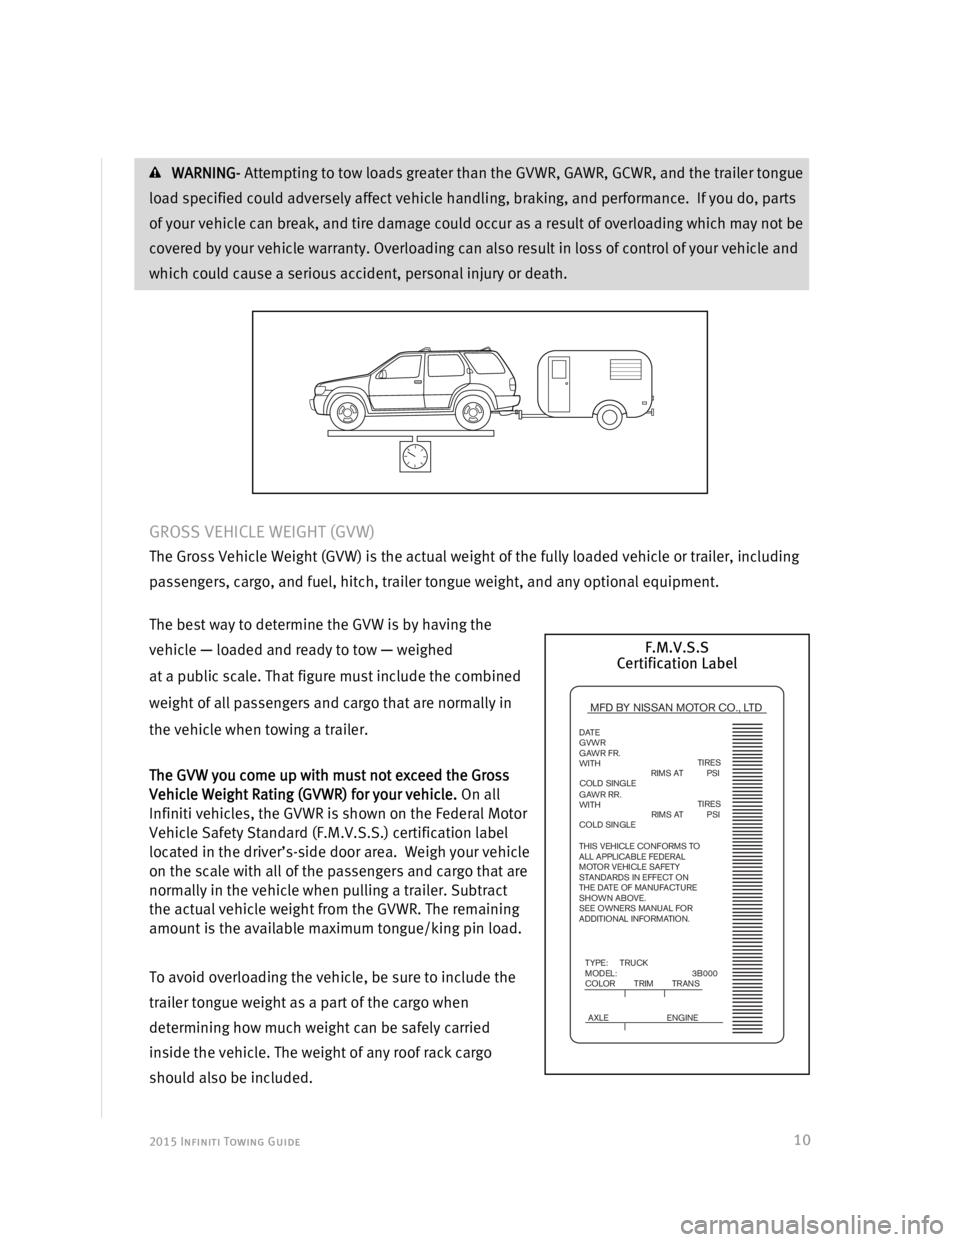 INFINITI QX60 HYBRID 2015  Towing Guide  2015 Infiniti Towing Guide  
 
 
10
 WARNING- Attempting to tow loads greater than the GVWR, GAWR, GCWR, and the trailer tongue 
load specified could adversely affect vehicle handling, braking, and p